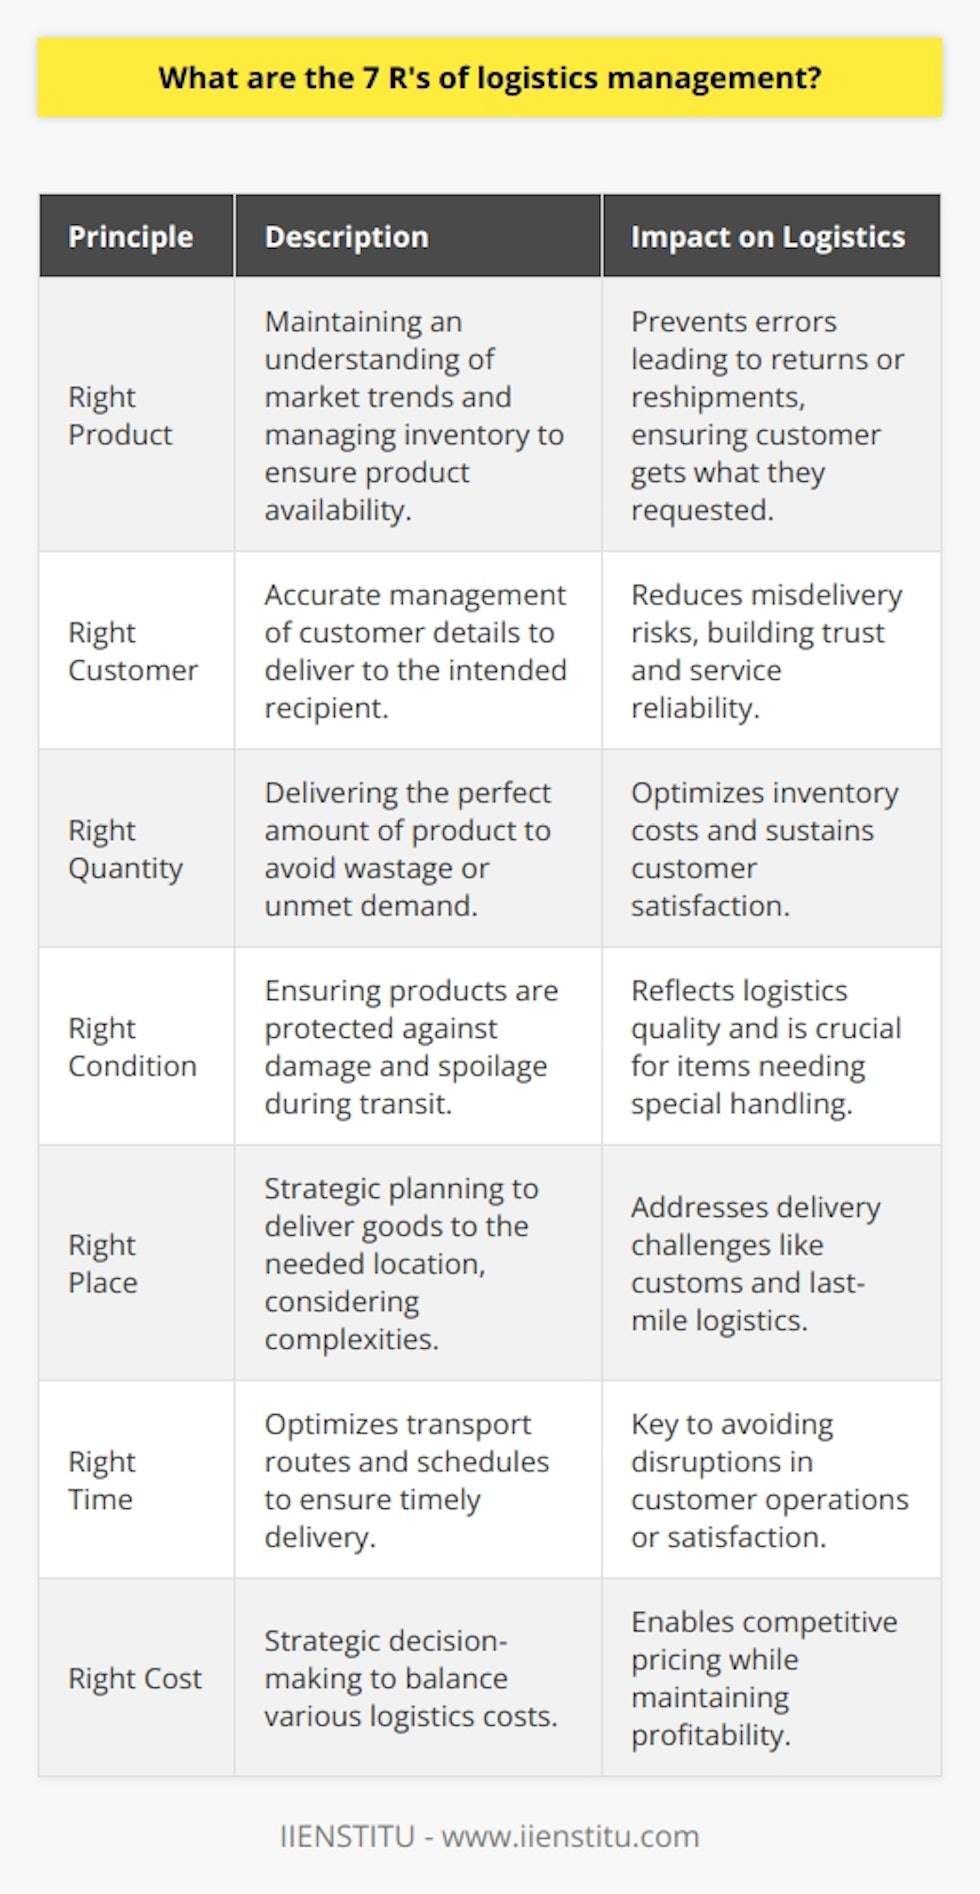 Effective logistics management is the backbone of successful supply chain operations, ensuring the efficient movement of goods from supplier to customer. The 7 R's of logistics management comprise core principles that ensure this process runs smoothly, focusing on delivering goods in a way that balances efficiency with customer satisfaction. These seven components play a critical role in the strategic planning and execution of logistics activities.**Right Product:** The foundation of logistics is supplying the product that the customer has requested. This requires an astute understanding of market trends and customer preferences, coupled with precise inventory management to ensure the availability of the desired items. Correctly identifying the product also avoids errors that could lead to returns, dissatisfaction, or extra costs due to re-delivery.**Right Customer:** Logistics does not end with getting the product to its destination; it must reach the correct recipient. With the rise of e-commerce and global shipping, managing and verifying customer details is paramount. The right customer principle minimizes the risk of misdelivery, ensuring trust and reliability in the service provided.**Right Quantity:** Having the ideal amount of product delivered is essential. Over-delivery can lead to excess inventory and wastage, whereas under-delivery can result in unmet demand and lost sales. Therefore, precision in order fulfillment is essential, enabling the reduction of inventory costs and ensuring customer satisfaction.**Right Condition:** The condition of the product upon arrival reflects the quality of the logistics service. Products must be protected against damage, spoilage, and theft during transit, with packaging and handling tailored to their specific requirements. This principle emphasizes the importance of processes such as proper packaging, temperature control for perishables, and secure storage for valuables.**Right Place:** This involves meticulous planning to ensure that goods are delivered to the location where they are needed. It is more than just delivering to the correct address—it's about understanding the geographic and logistical complexities that impact delivery, such as local customs regulations for international shipments or last-mile delivery challenges in urban areas.**Right Time:** Timing is critical in logistics. Delivering too early or too late can equally disrupt the customer's operations or satisfaction. Efficient logistics operations focus on optimizing transport routes, managing schedules, and predicting potential disruptions to ensure timely delivery.**Right Cost:** The final R refers to achieving the most economical cost for the entire logistics process, without compromising quality or delivery times. This involves strategic decision-making to balance trade-offs between different costs such as shipment, storage, and inventory. By optimizing logistics expenditures, a company can offer competitive pricing while maintaining profitability.The 7 R's of logistics management provide a framework for excellence in supply chain efficiency and effectiveness. By adhering to these guidelines, organizations can ensure a seamless flow of goods while enhancing customer experience and maintaining cost control. For organizations like IIENSTITU that offer courses and training in logistics and supply chain management, understanding and teaching these principles is crucial to equipping professionals with the knowledge required to drive success in a complex, dynamic field.